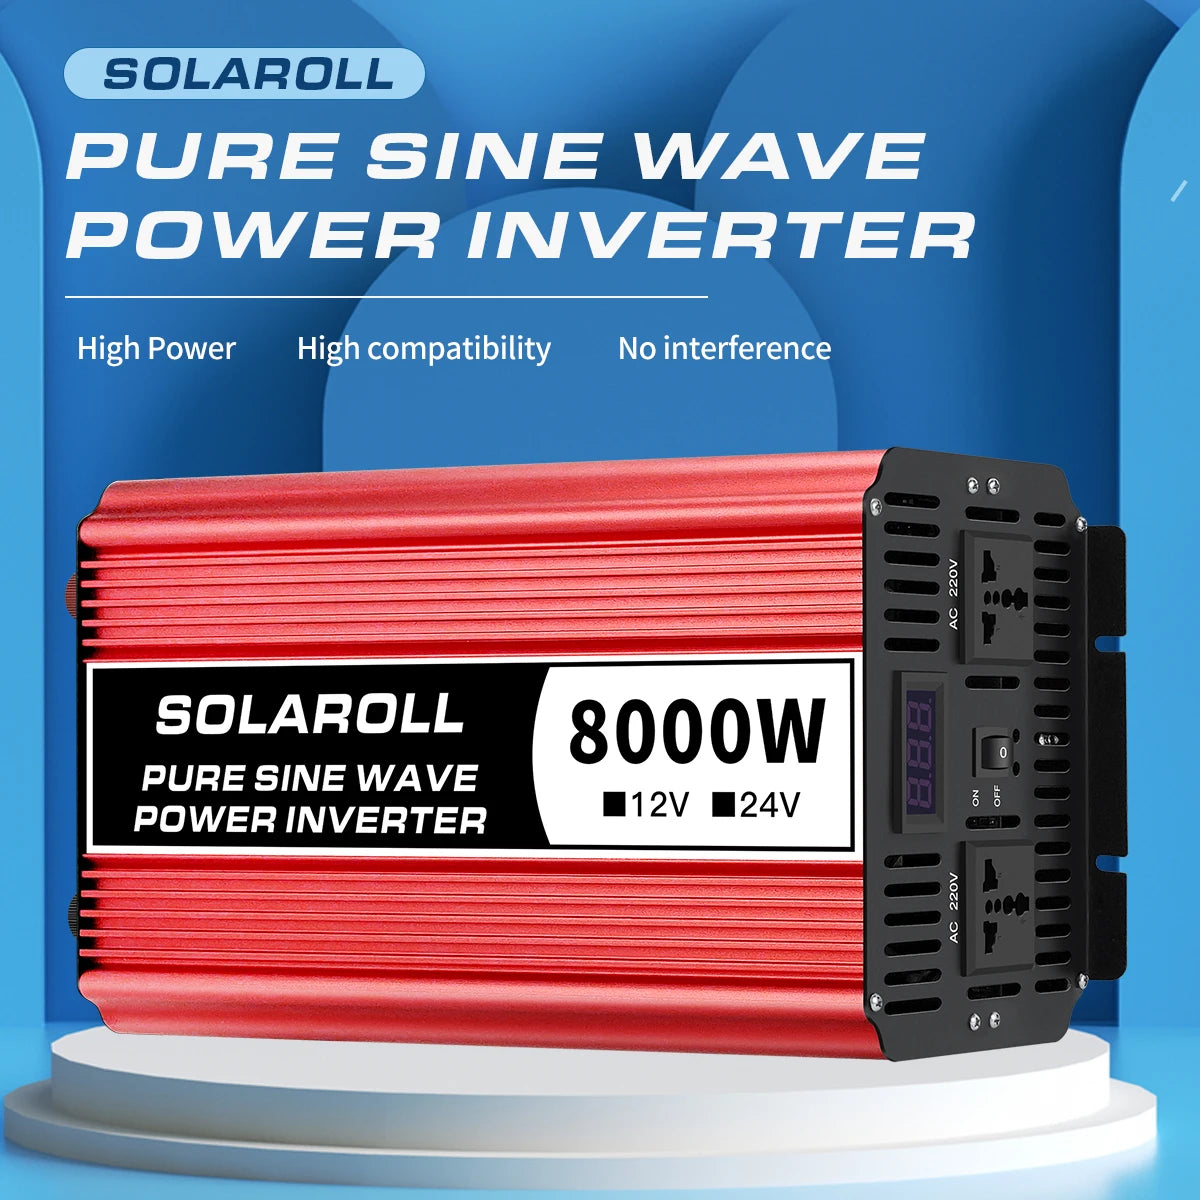 High-power pure sine wave inverter converts DC power to AC power with high compatibility and no interference.